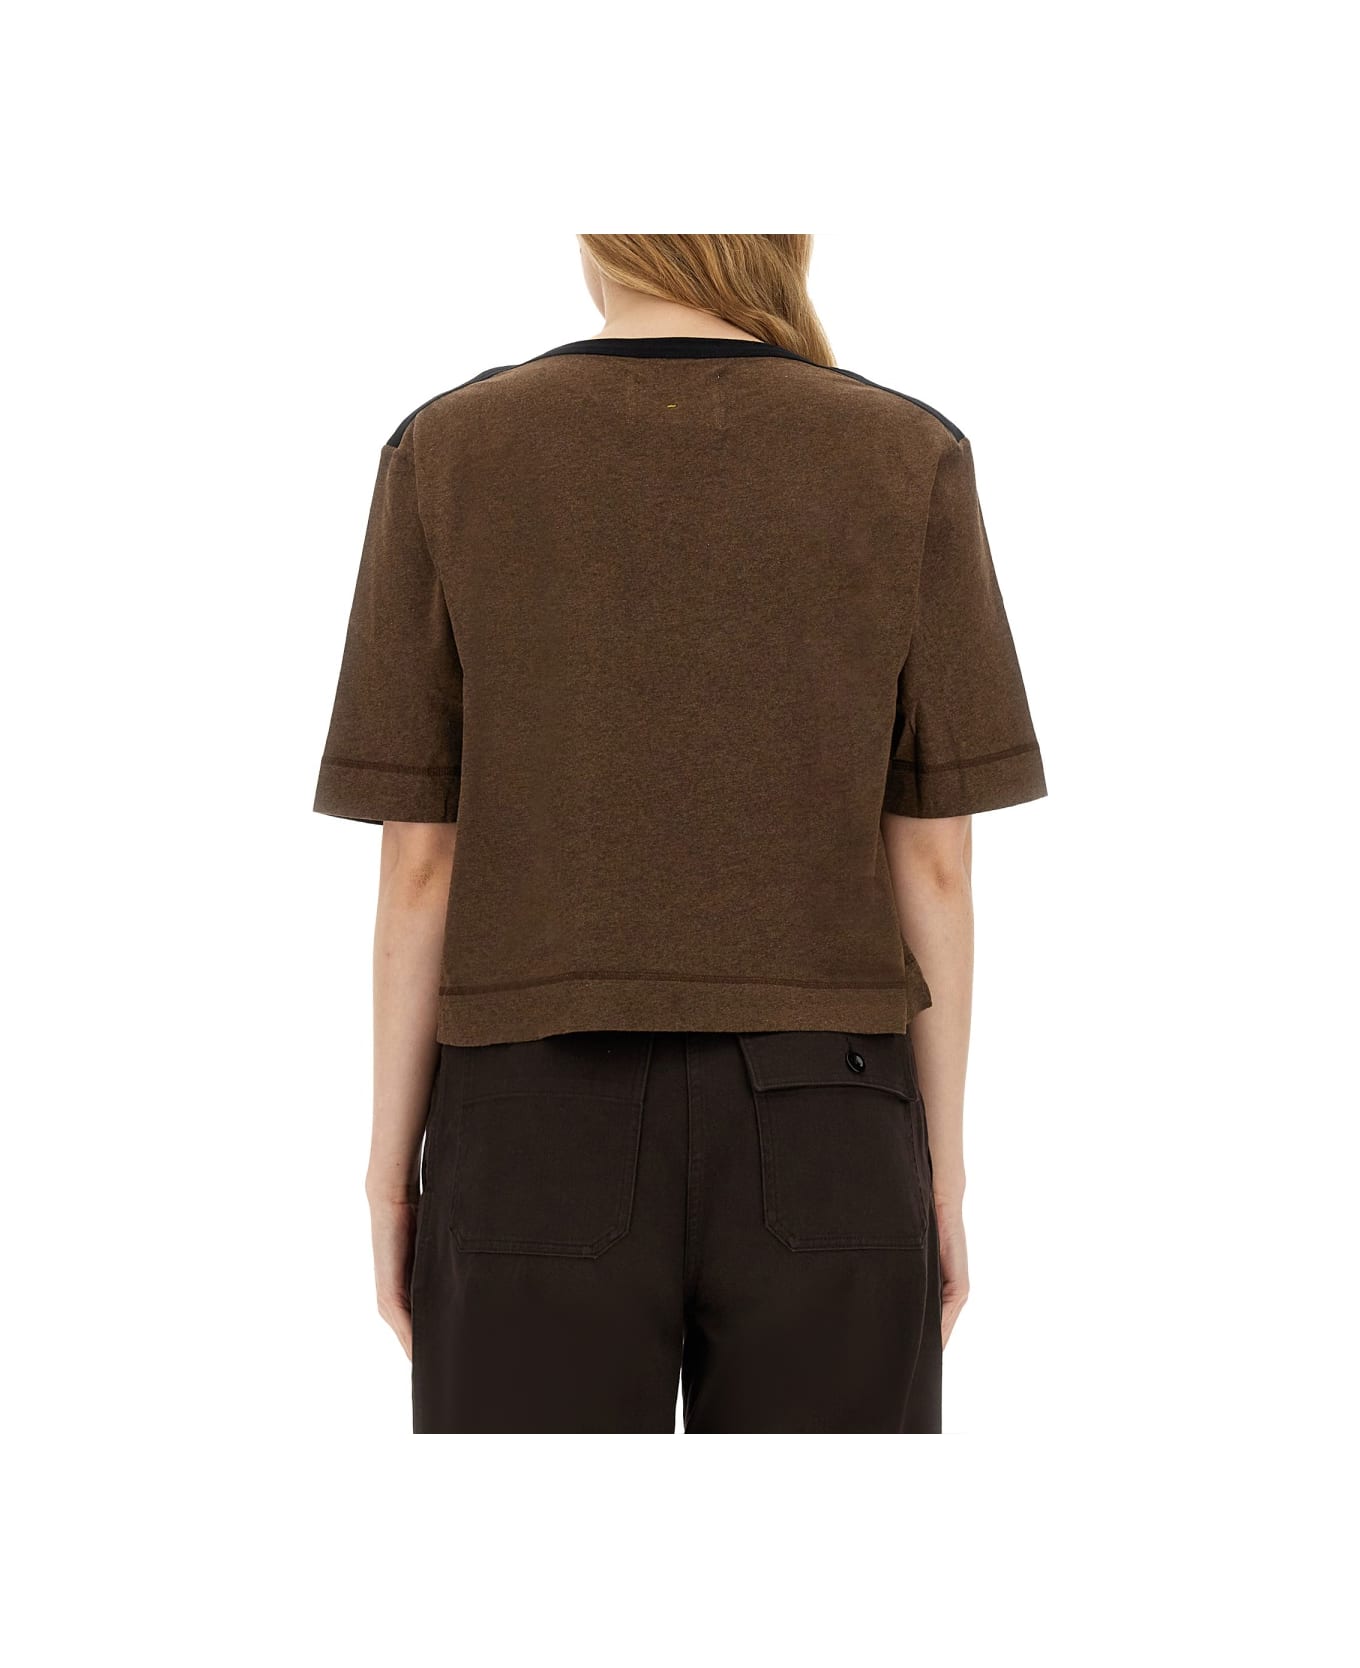 Margaret Howell Cropped T-shirt - BROWN